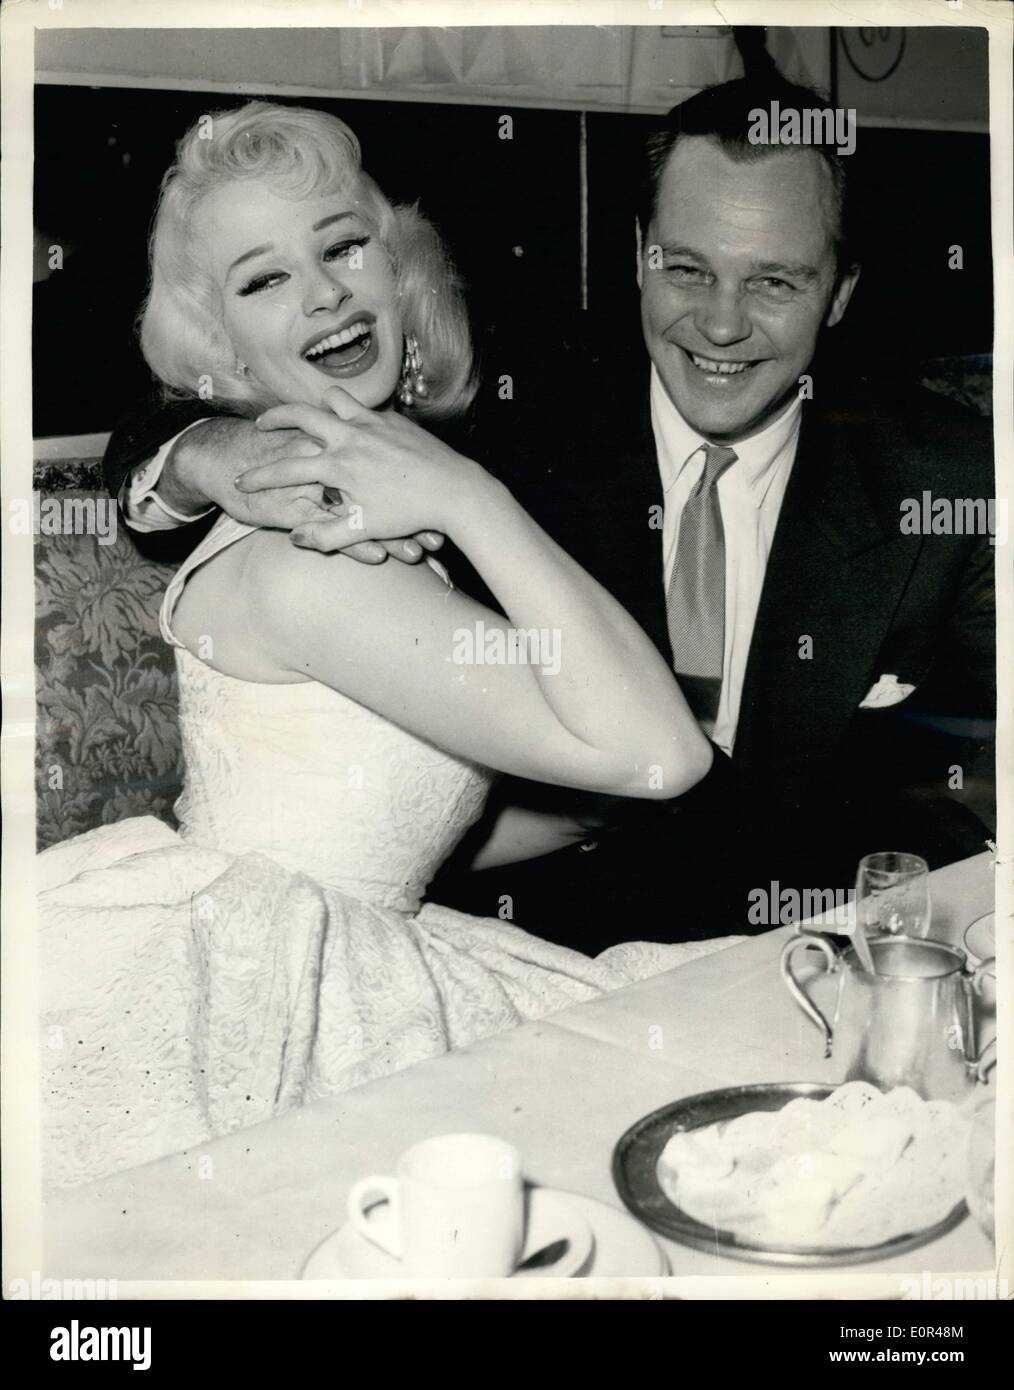 Dec. 09, 1957 - 9-12-57 The Prince and the showgirl. Sabrina and Prince Christian of Hanover. Popular showgirl Sabrina appears to be having plenty of fun with Prince Christian of Hanover over diner at the Colony Restaurant, London. It is said that the Prince planned to escort Sabrina to the Variety Artistes Ladies' Ball at the Dorchester Hotel but he is unable to do so as he is still in mourning of Prince George of Greece. Stock Photo